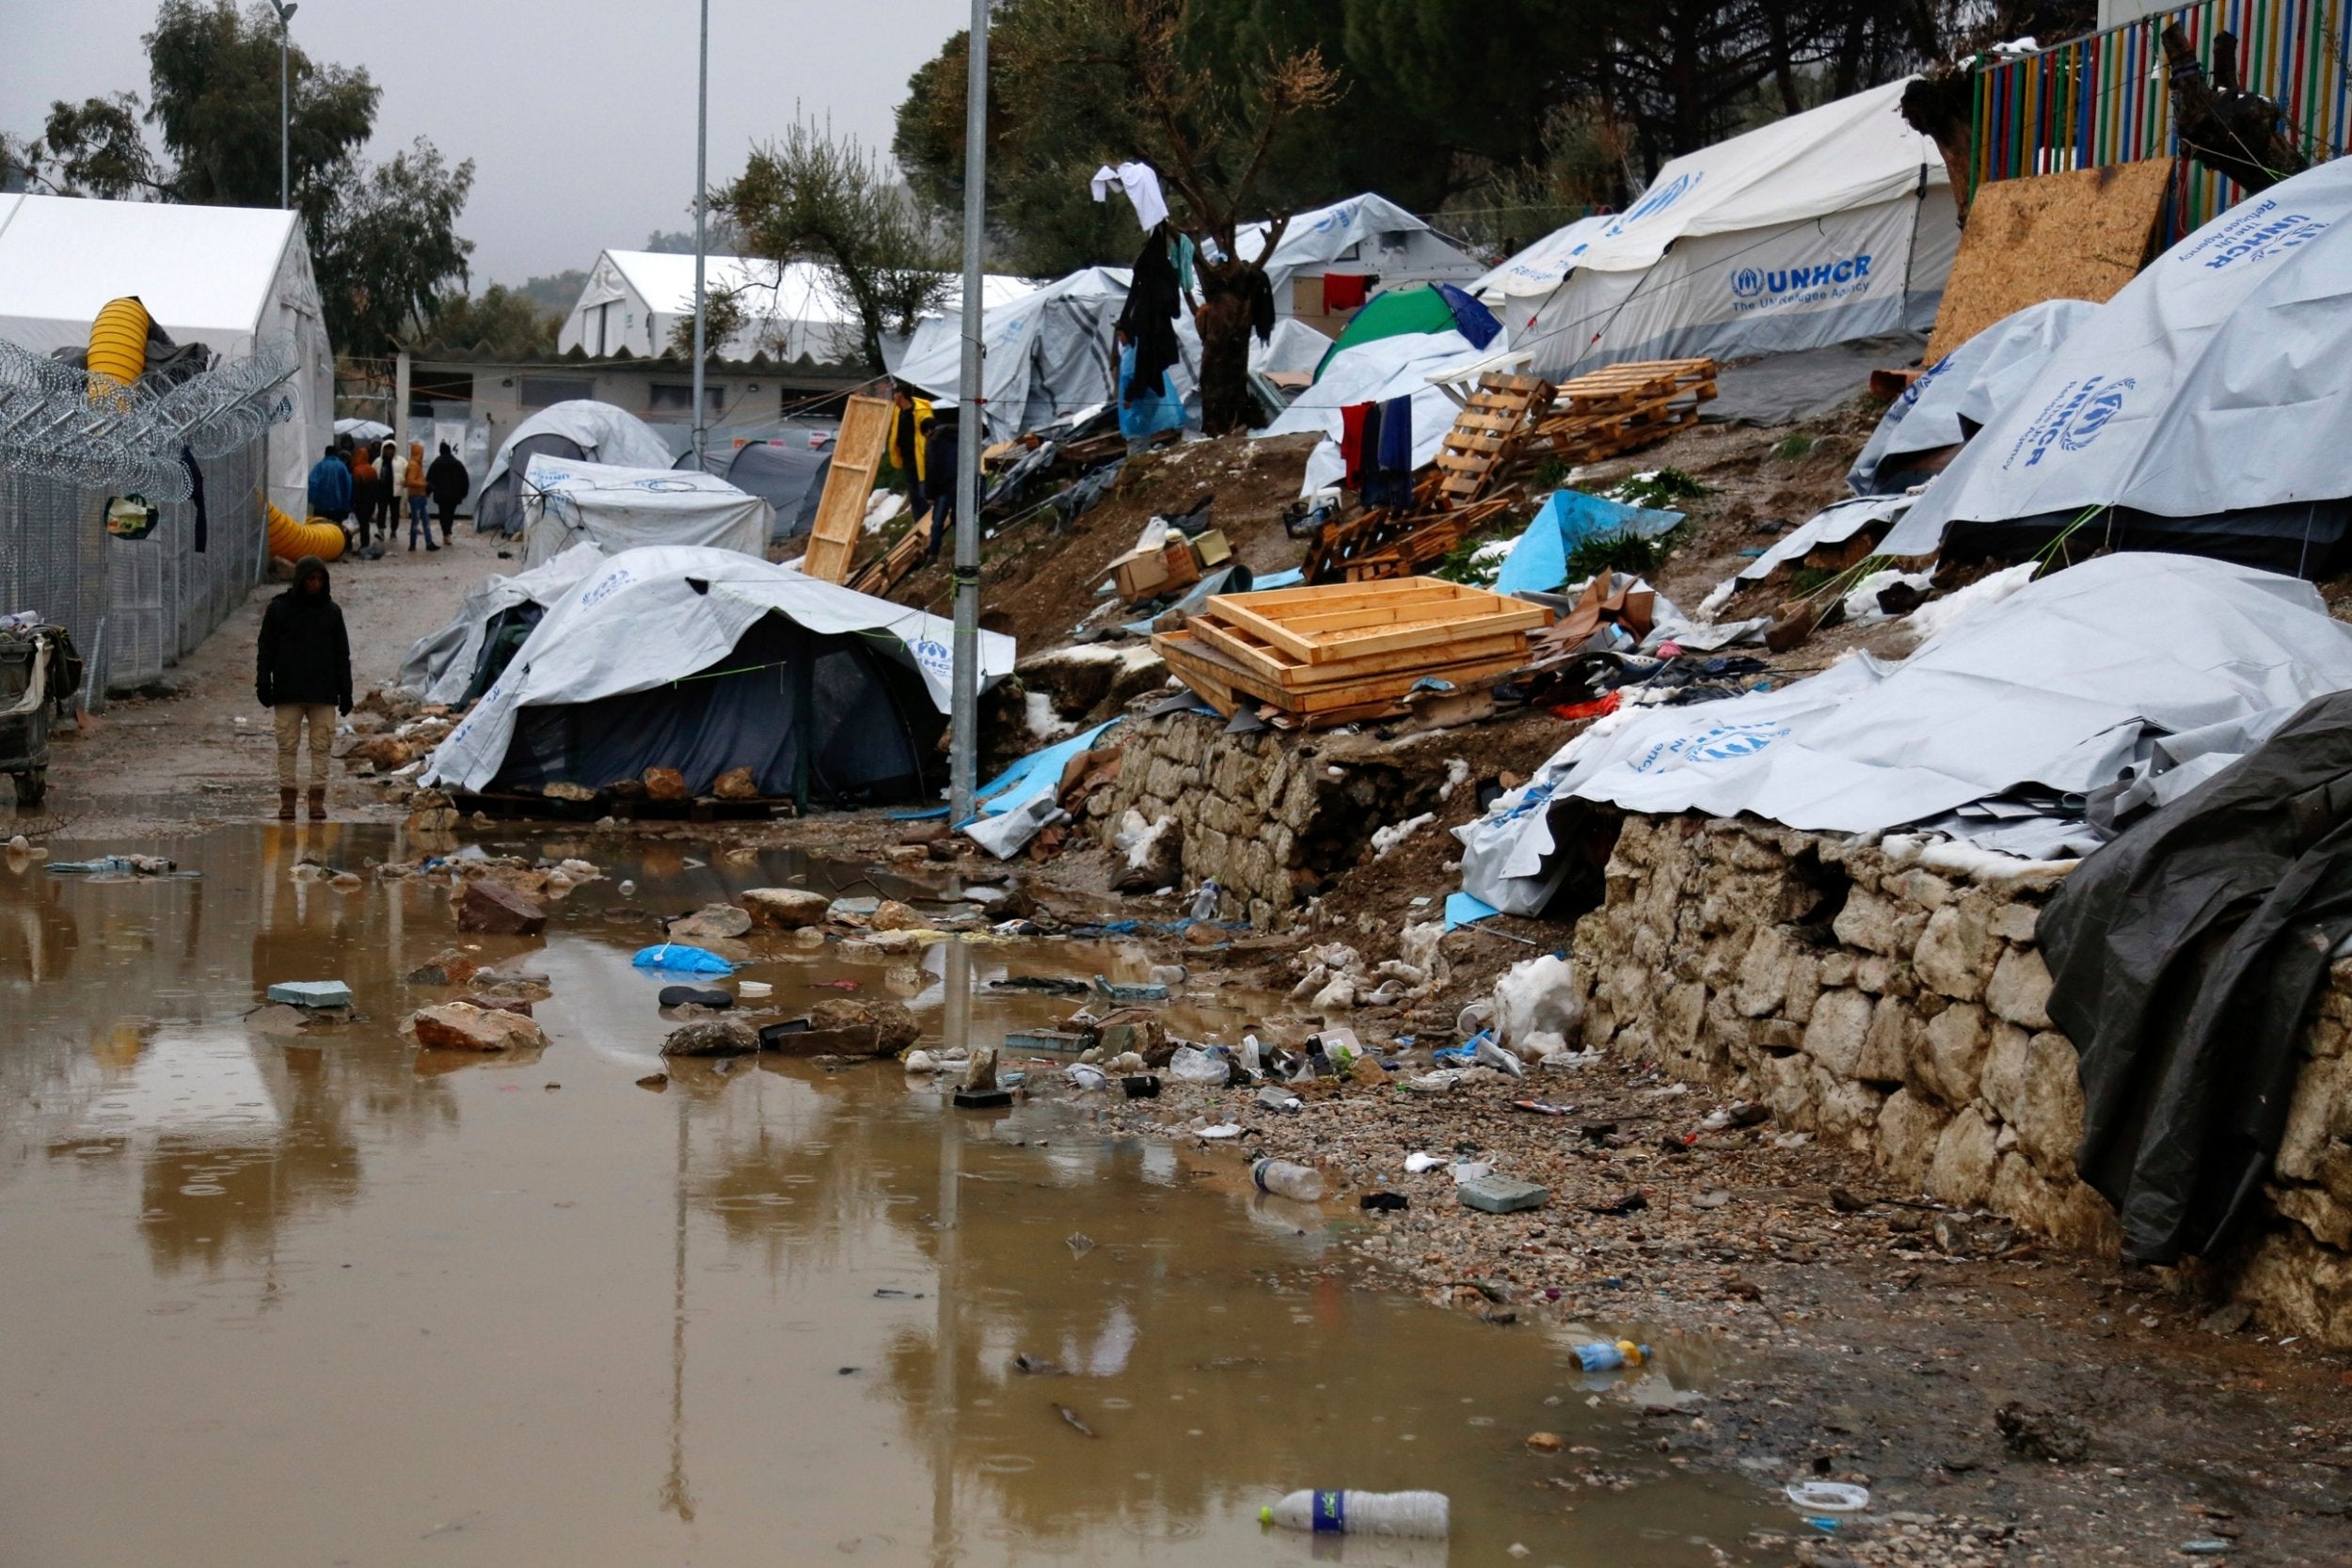 Conditions at the Moria refugee camp on Lesbos in January 2017